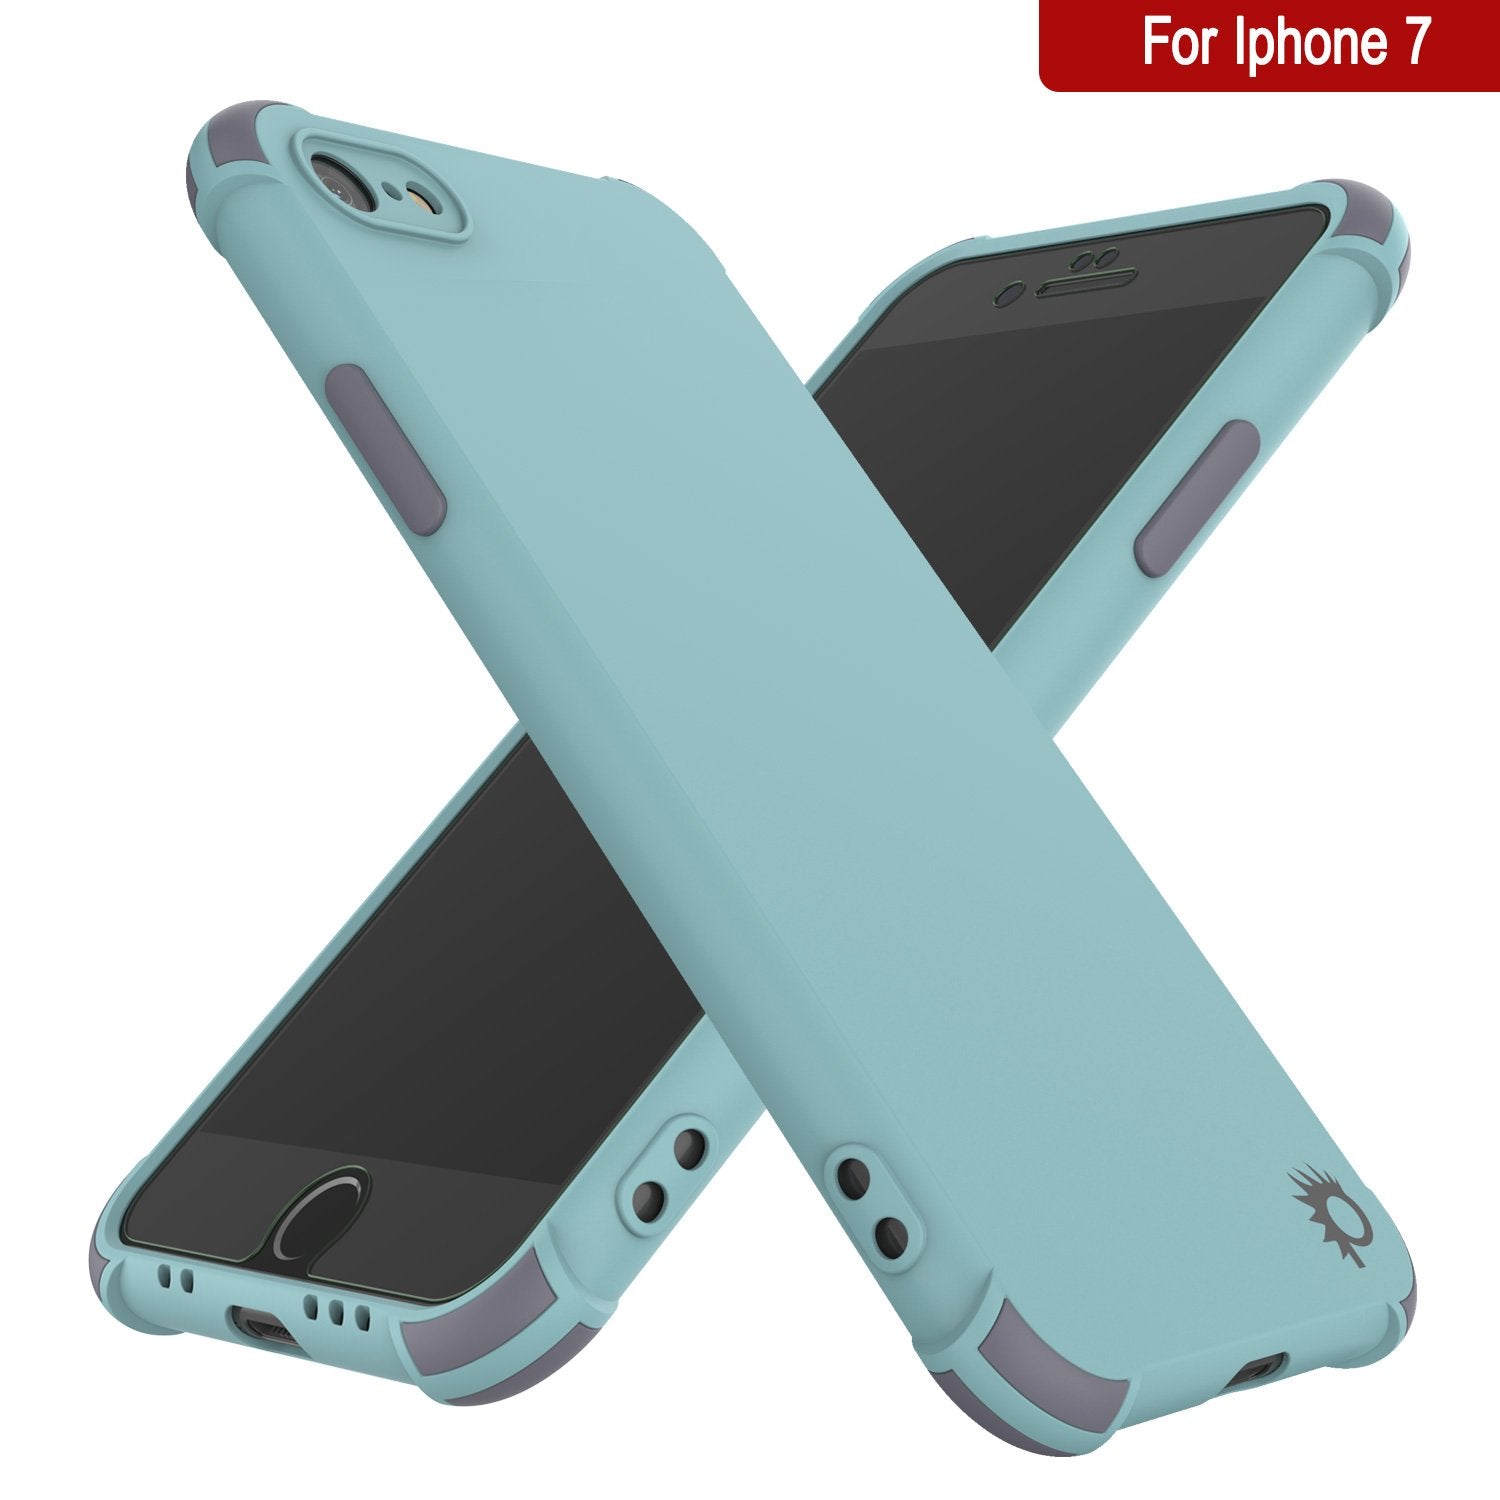 Punkcase Protective & Lightweight TPU Case [Sunshine Series] for iPhone 7 [Teal]